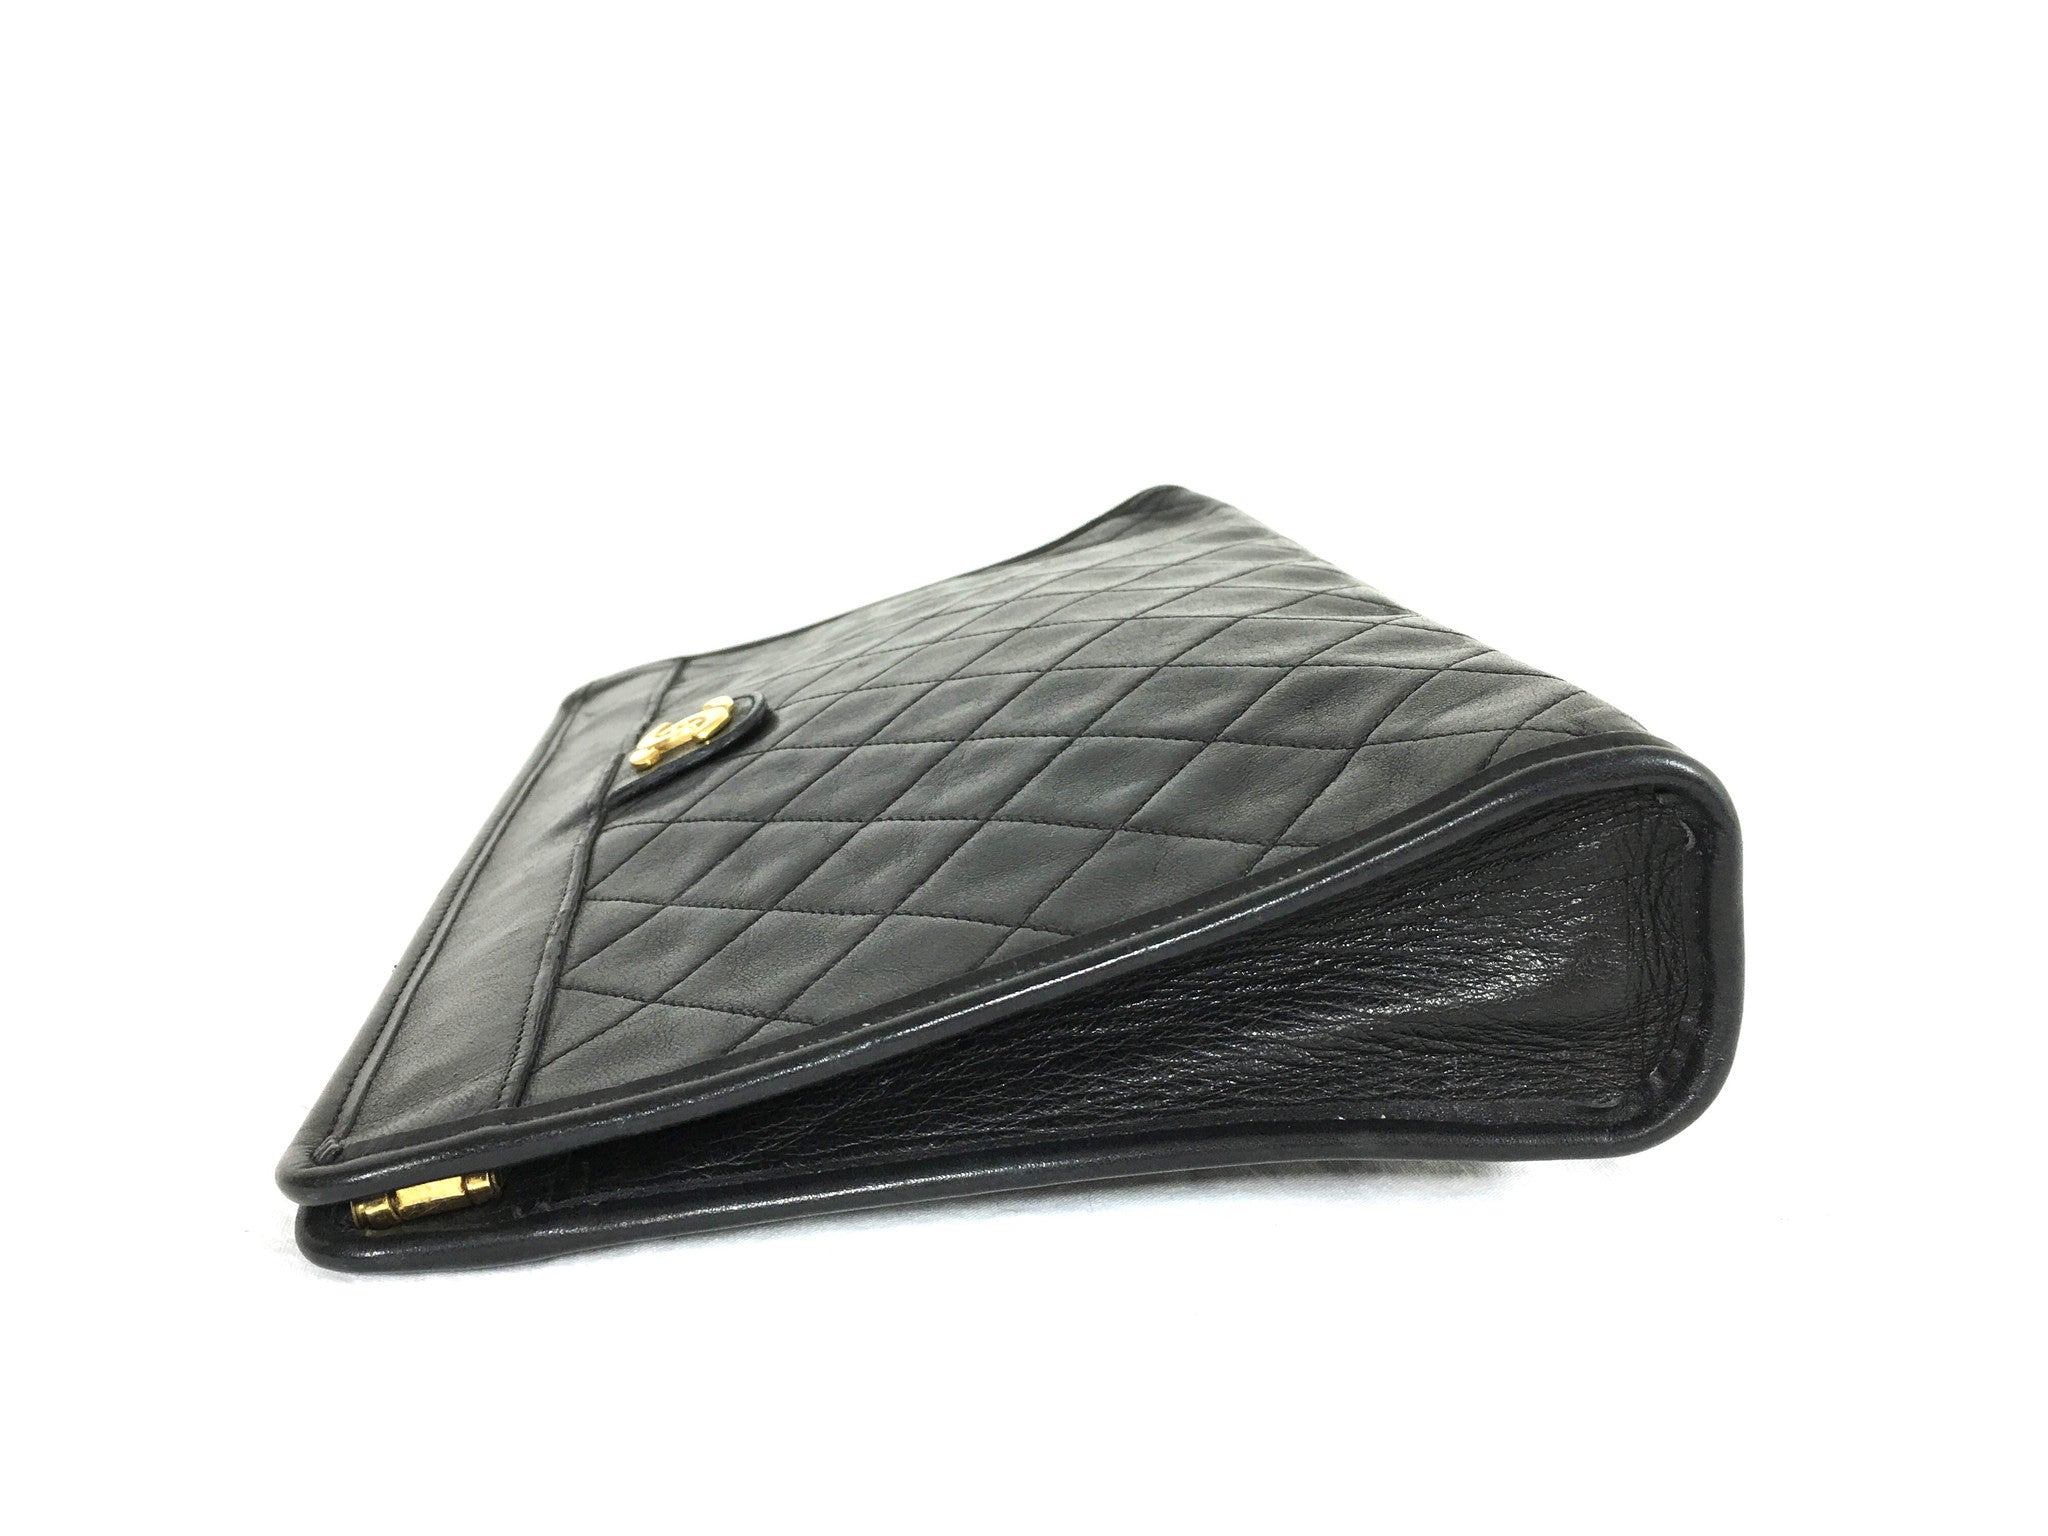 CHANEL Lambskin Quilted Evening Clutch